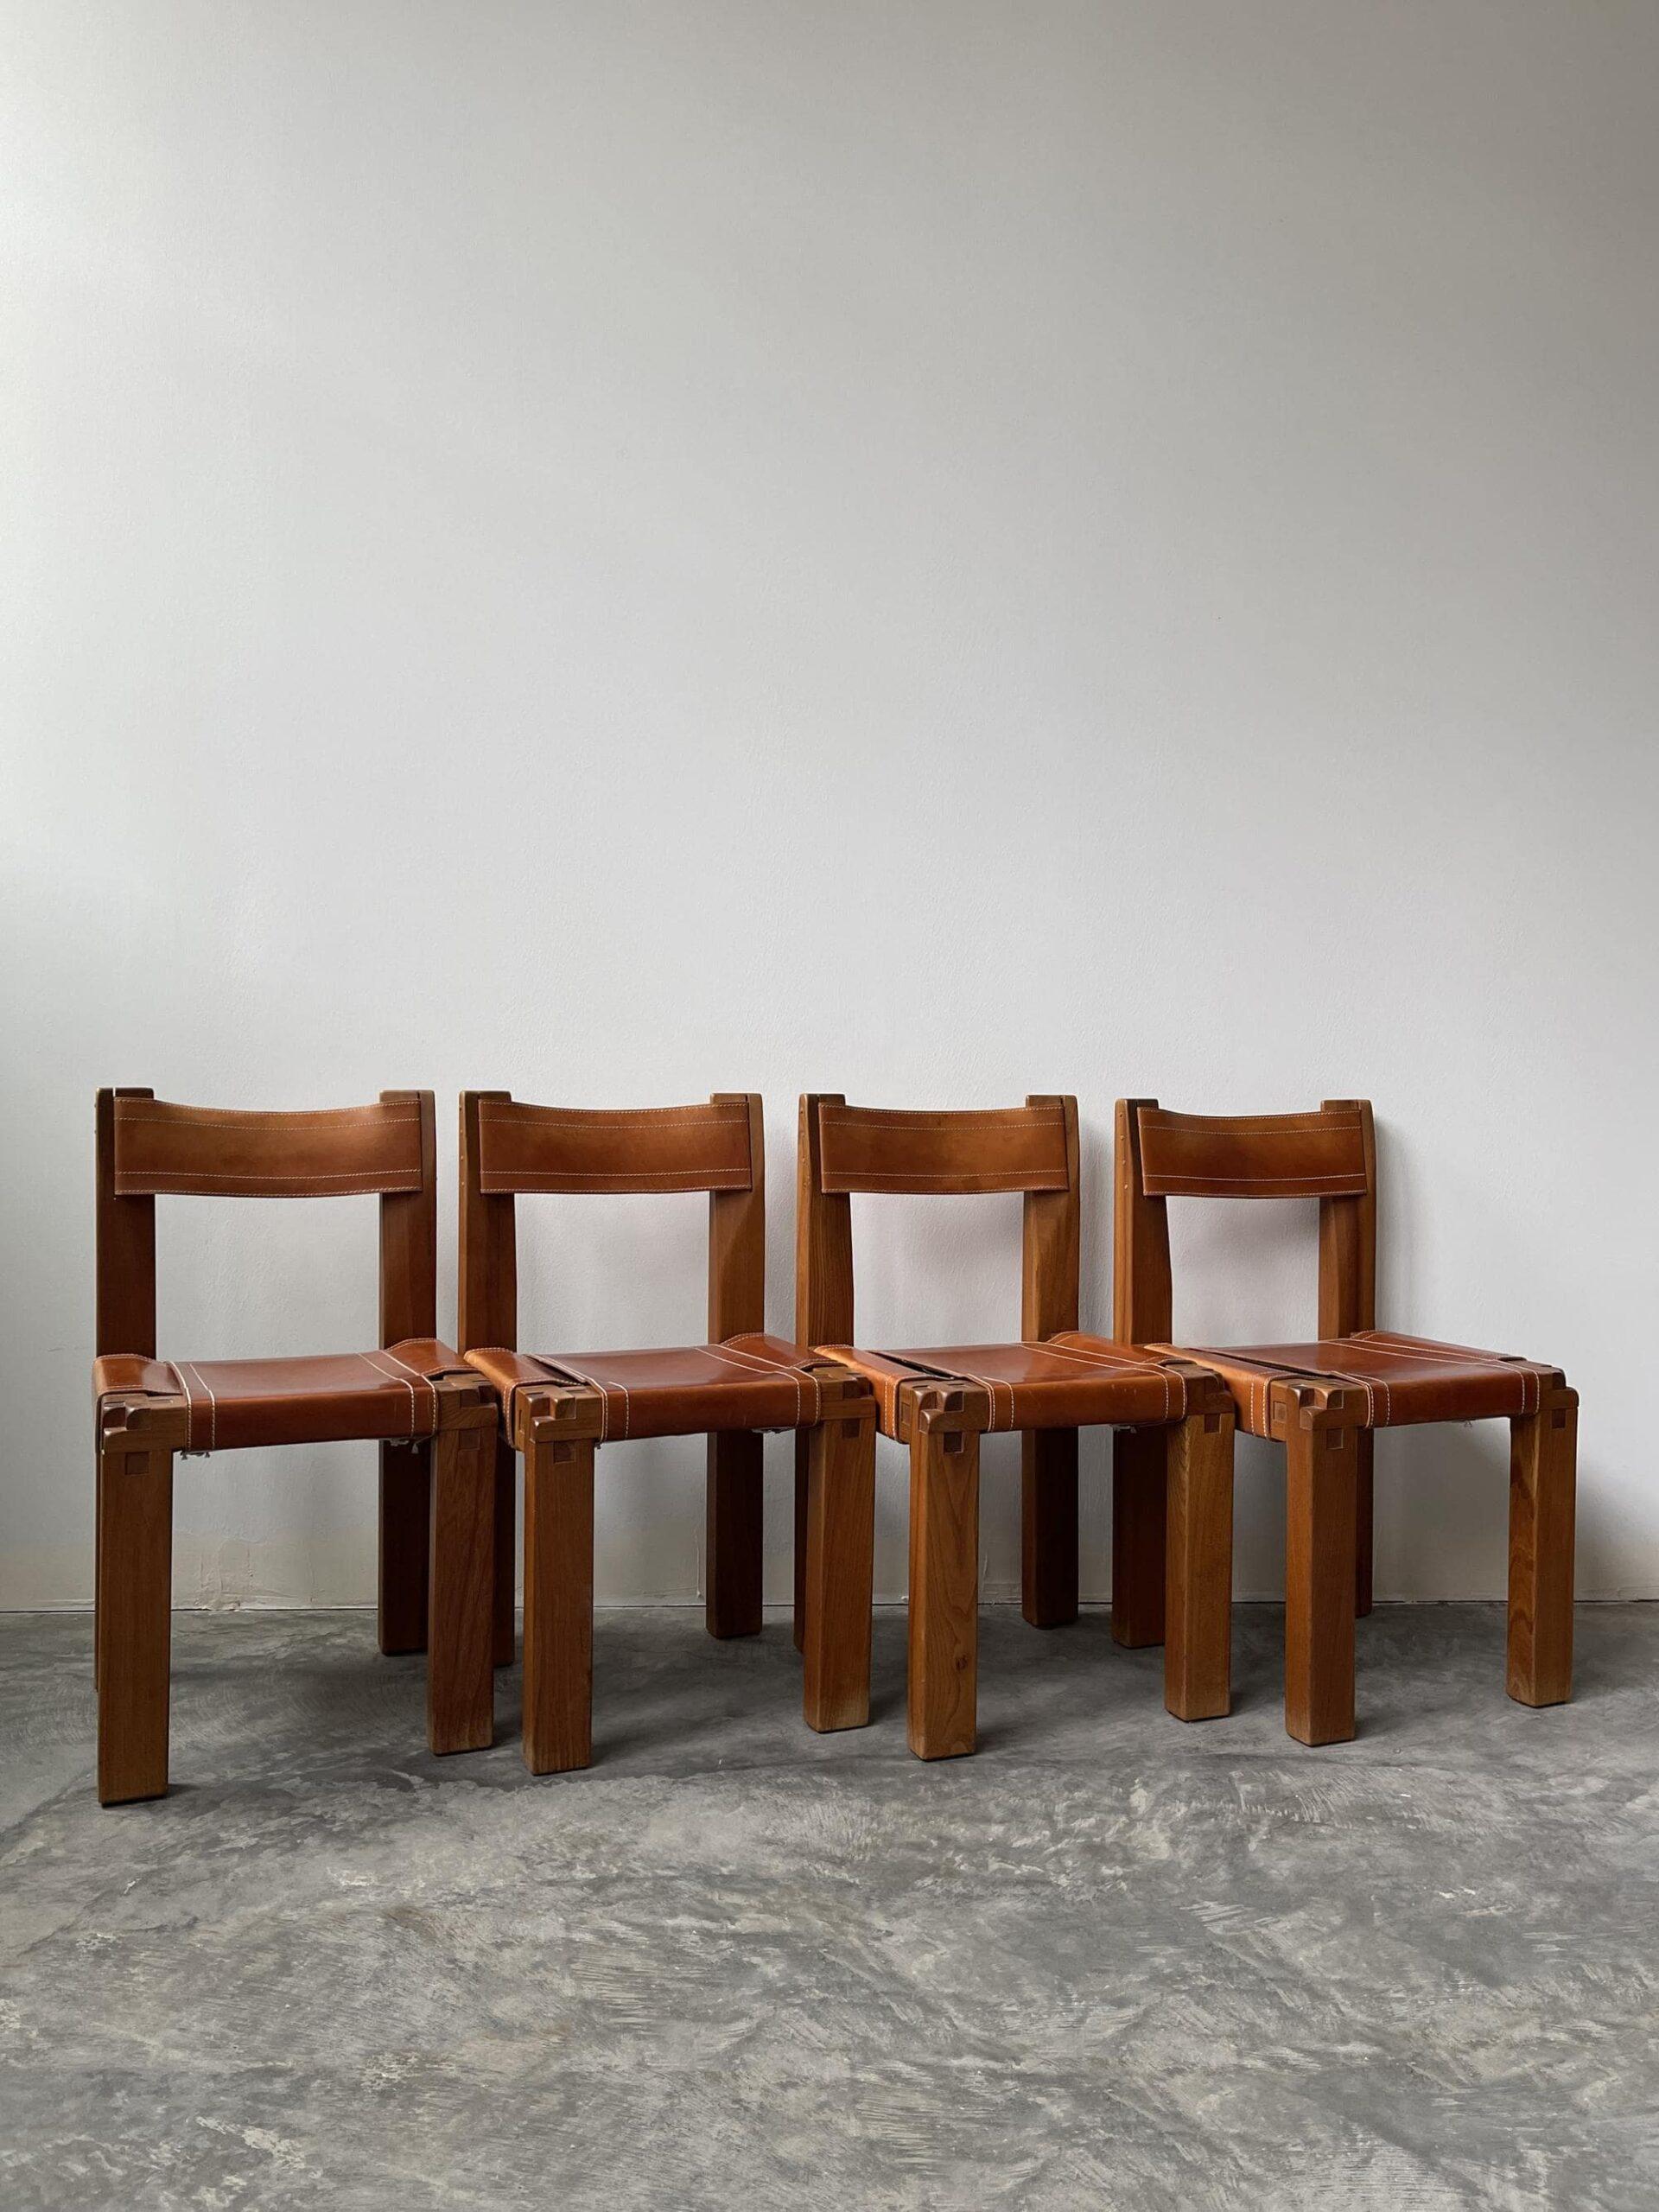 The remaining 2 from original set of 4.  These S11 chairs in near mint condition perfectly reveals Chapo’s artisanal craftsmanship and refined sharp design details as evidenced by its wood joinery and leather stitching.

A warm patina on the leather